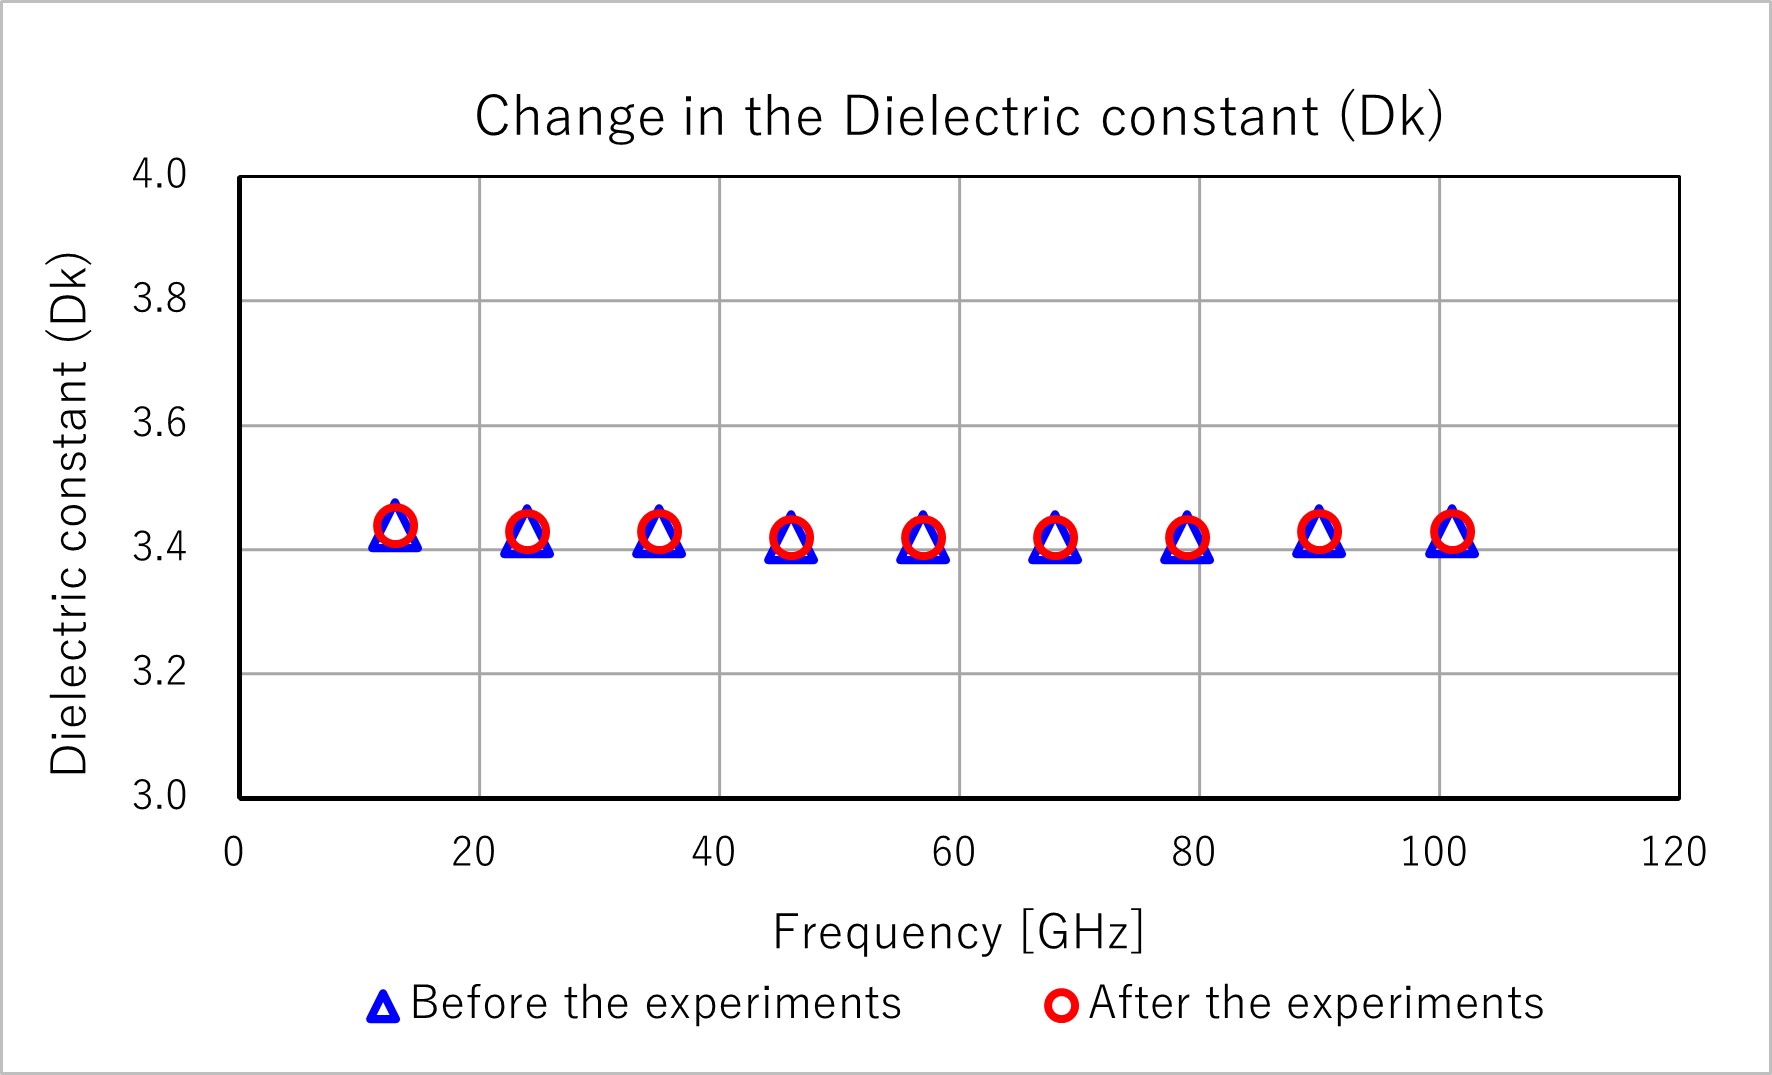 image:Change in the Dielectric constant (Dk)